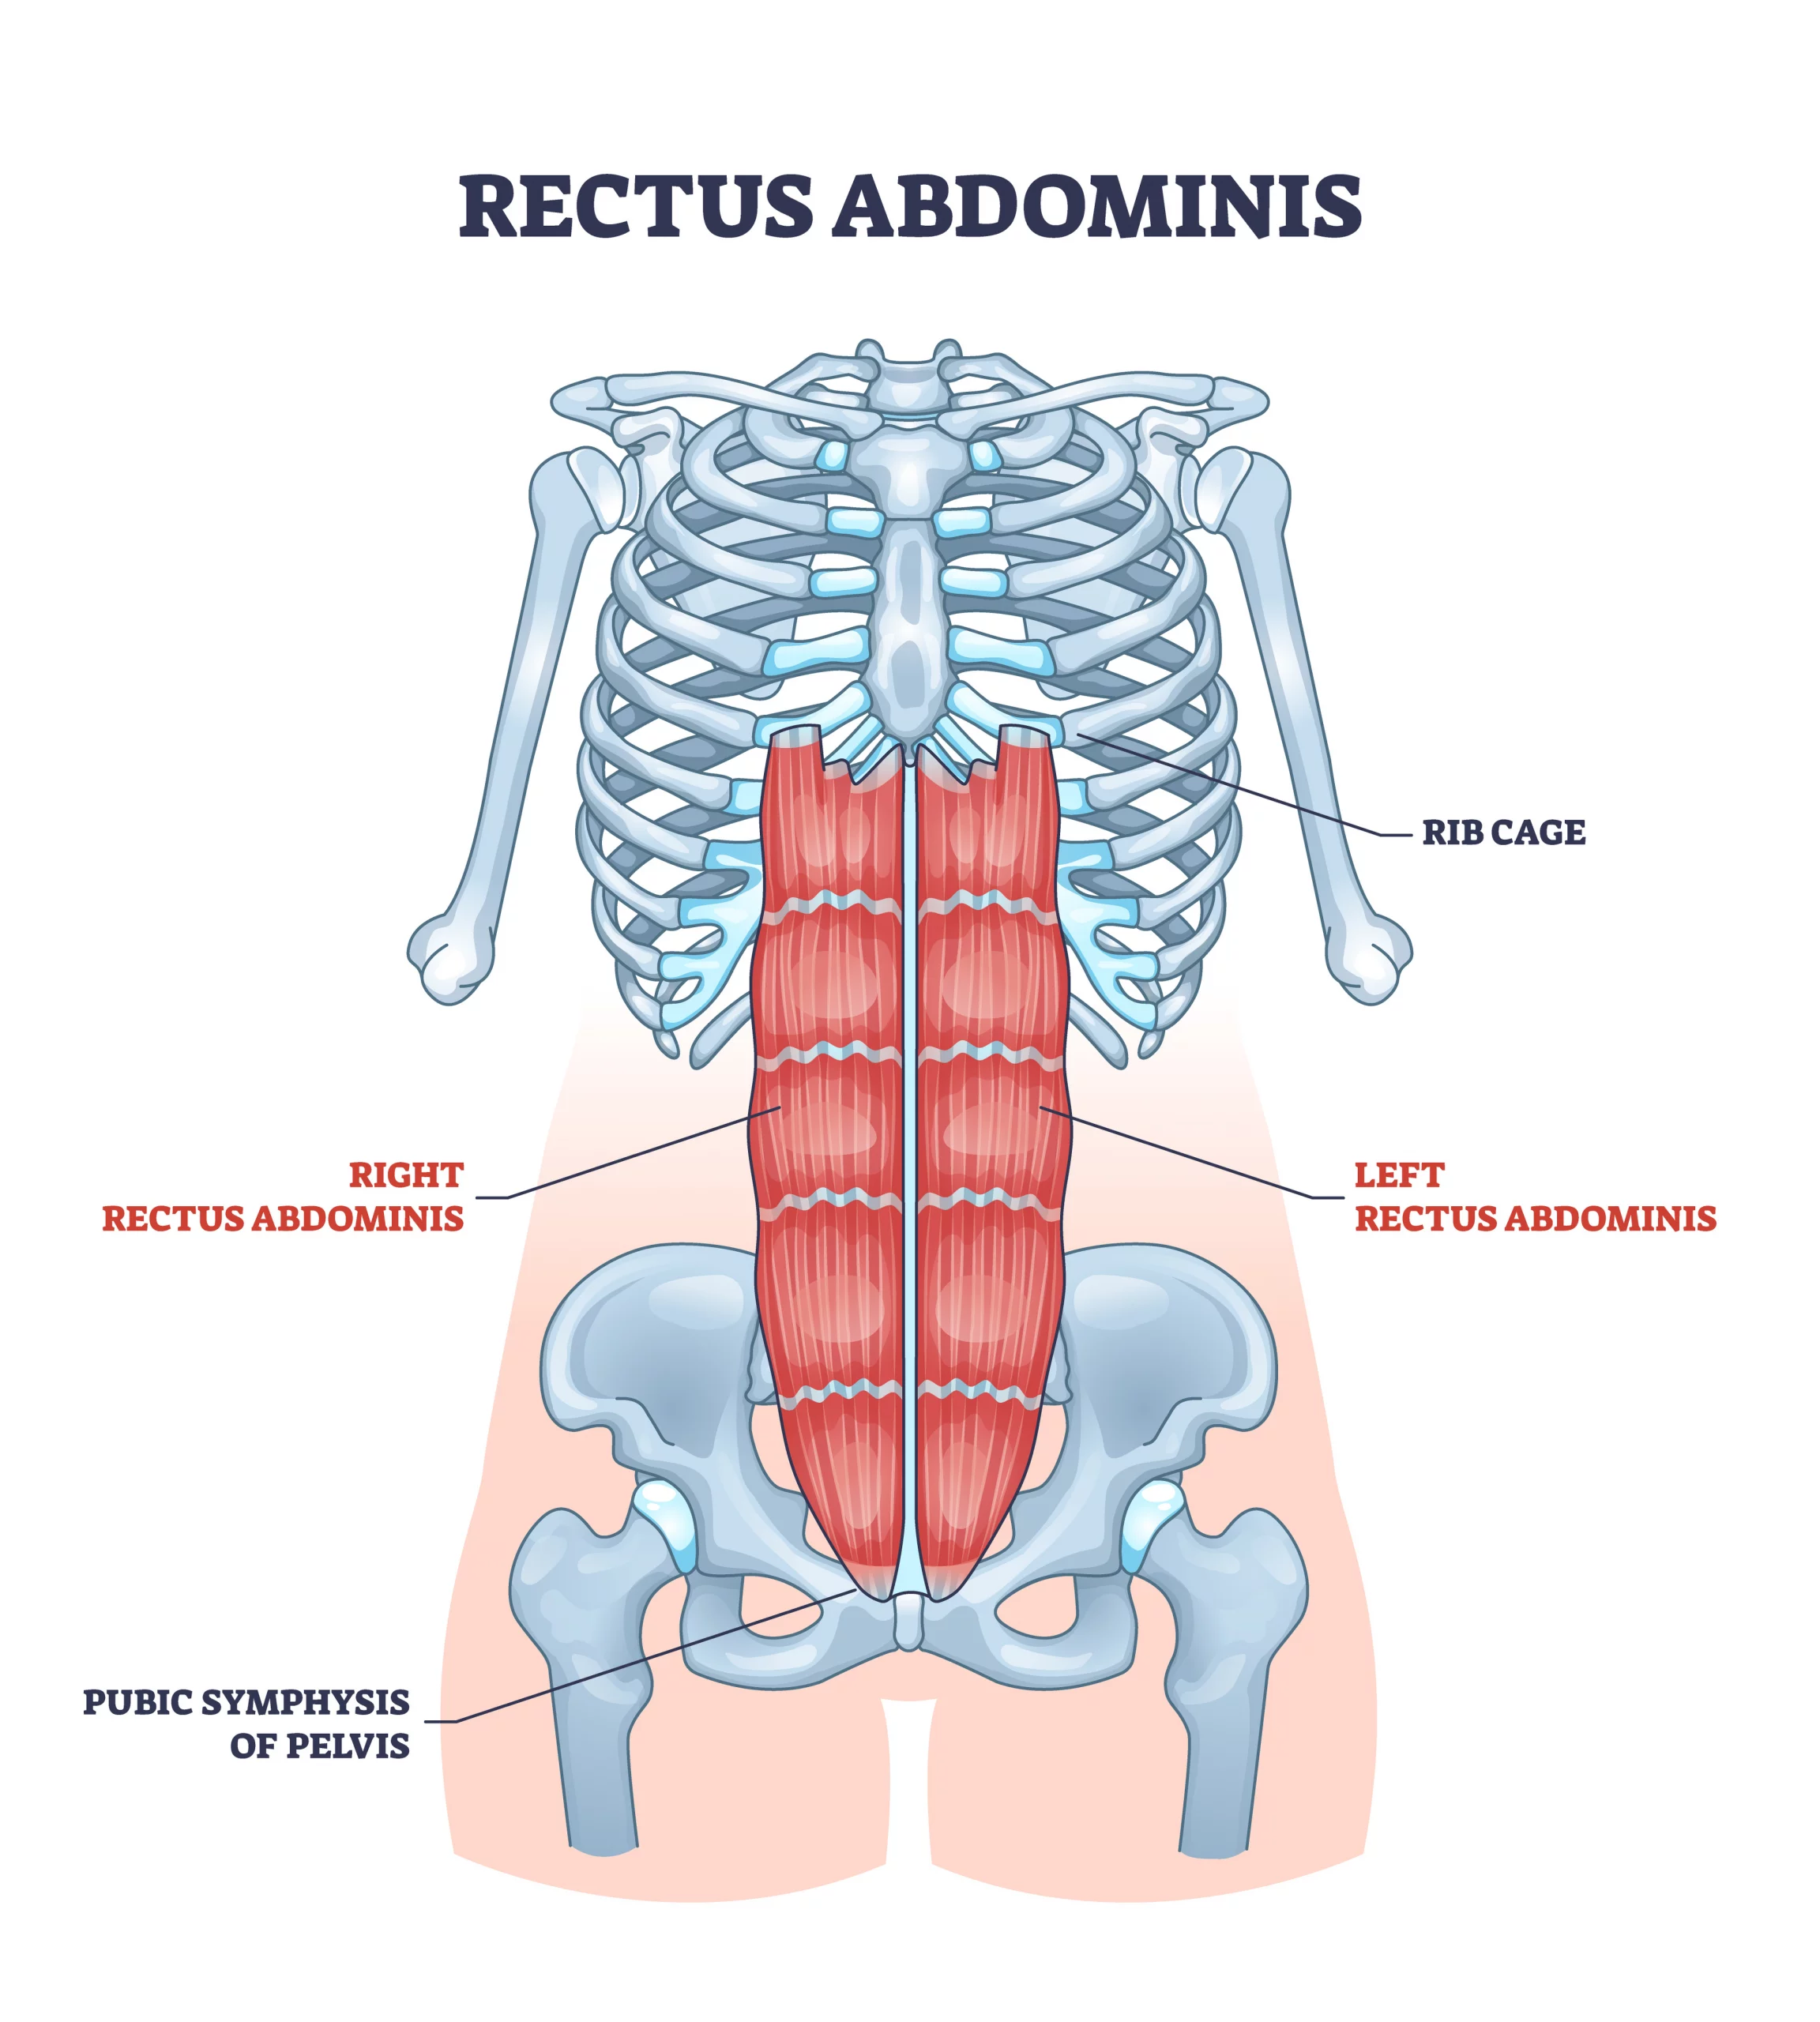 Rectus abdominis or abdominal abs muscular system anatomy outline diagram.